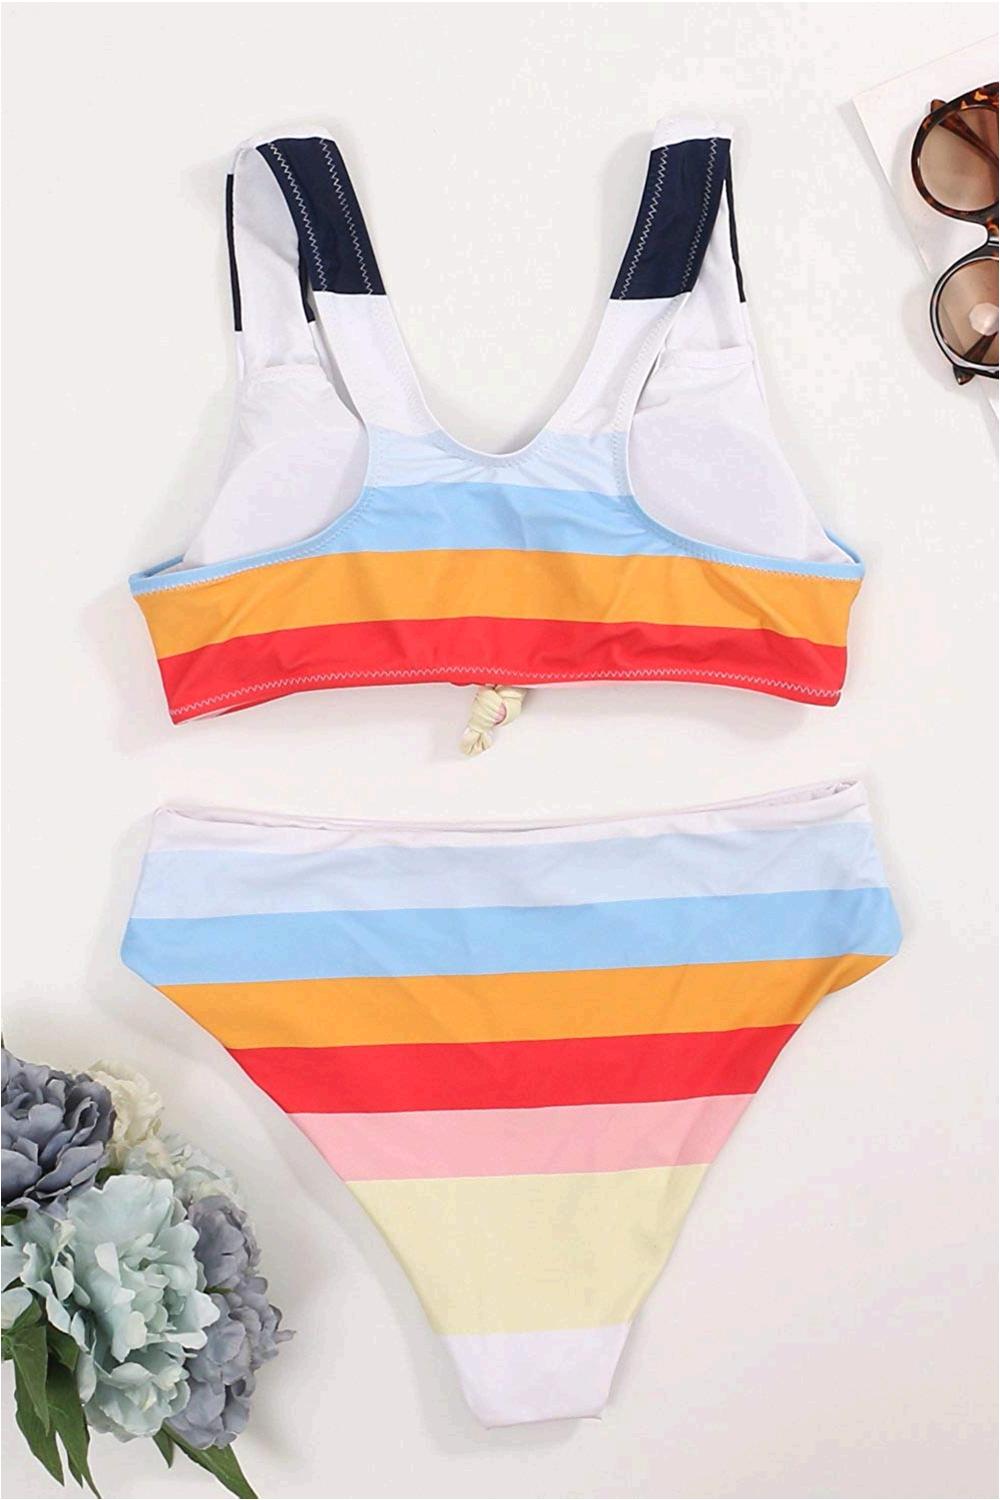 Honlyps Two Piece High Waisted Bathing Suit Striped Bikini, MultiColor ...